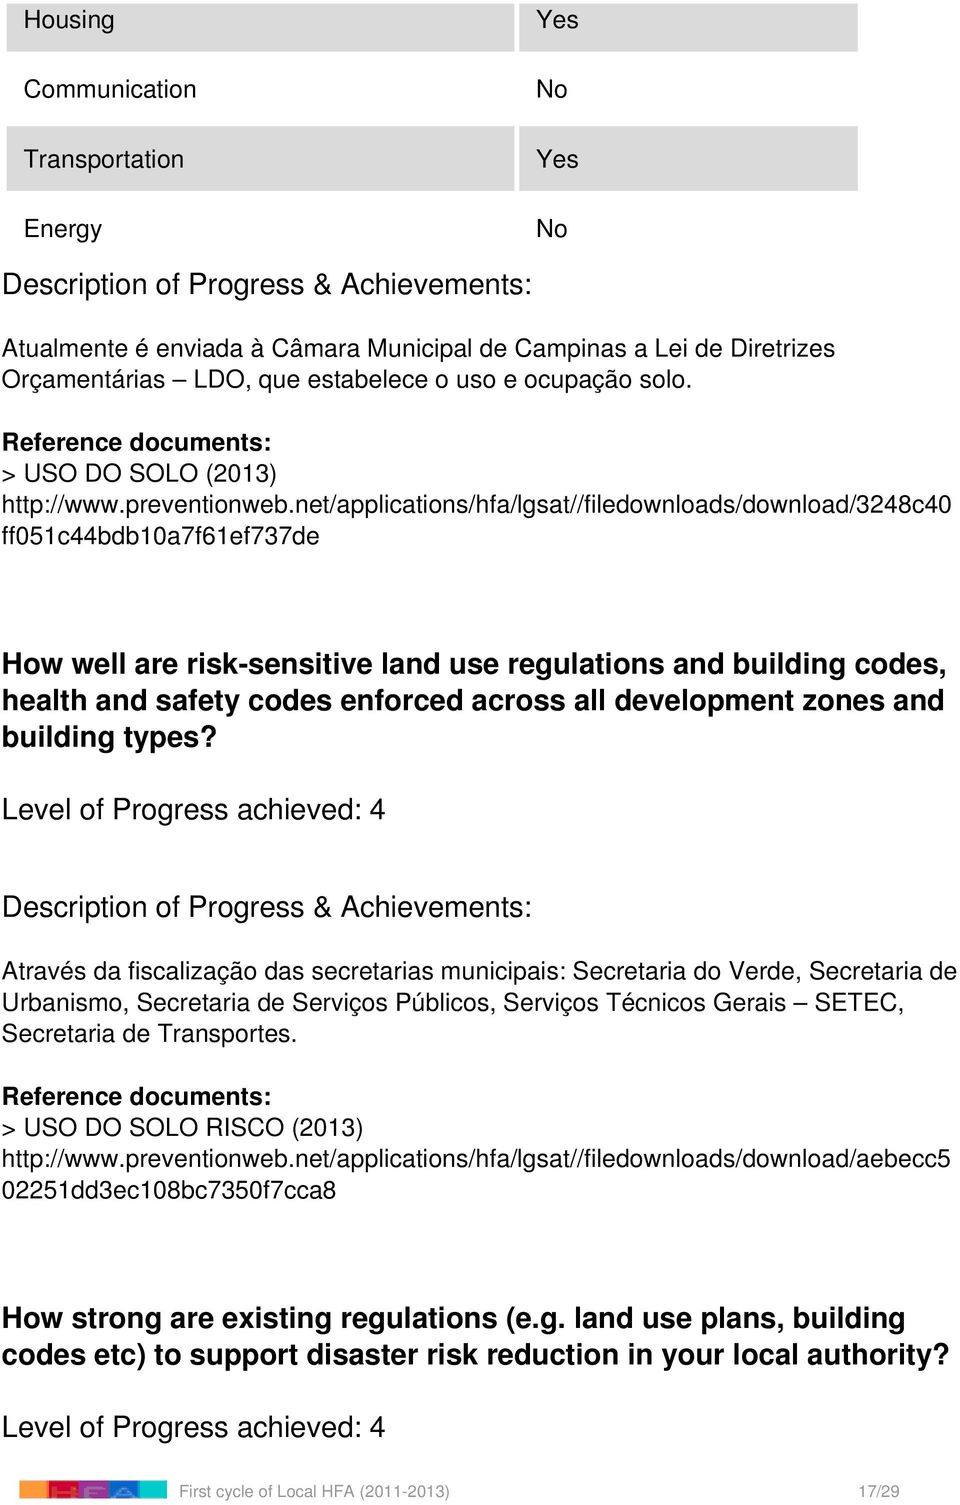 net/applications/hfa/lgsat//filedownloads/download/3248c40 ff051c44bdb10a7f61ef737de How well are risk-sensitive land use regulations and building codes, health and safety codes enforced across all